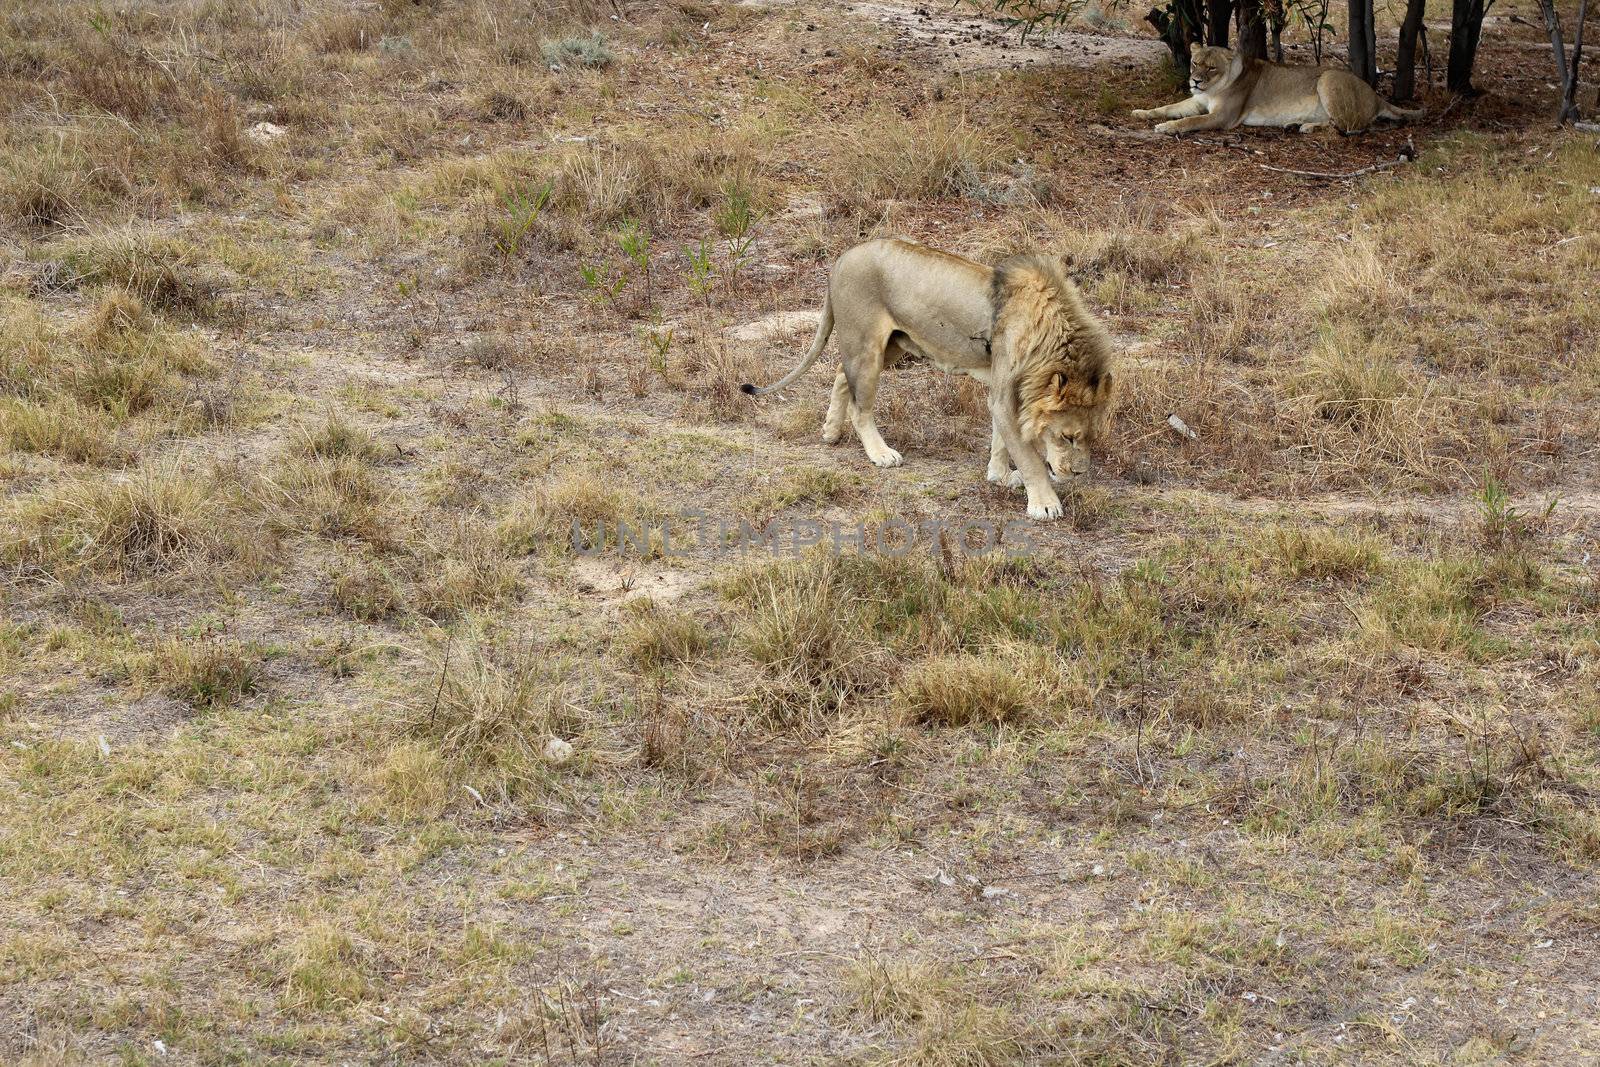 Two Lions at the cape town lion park in south africa